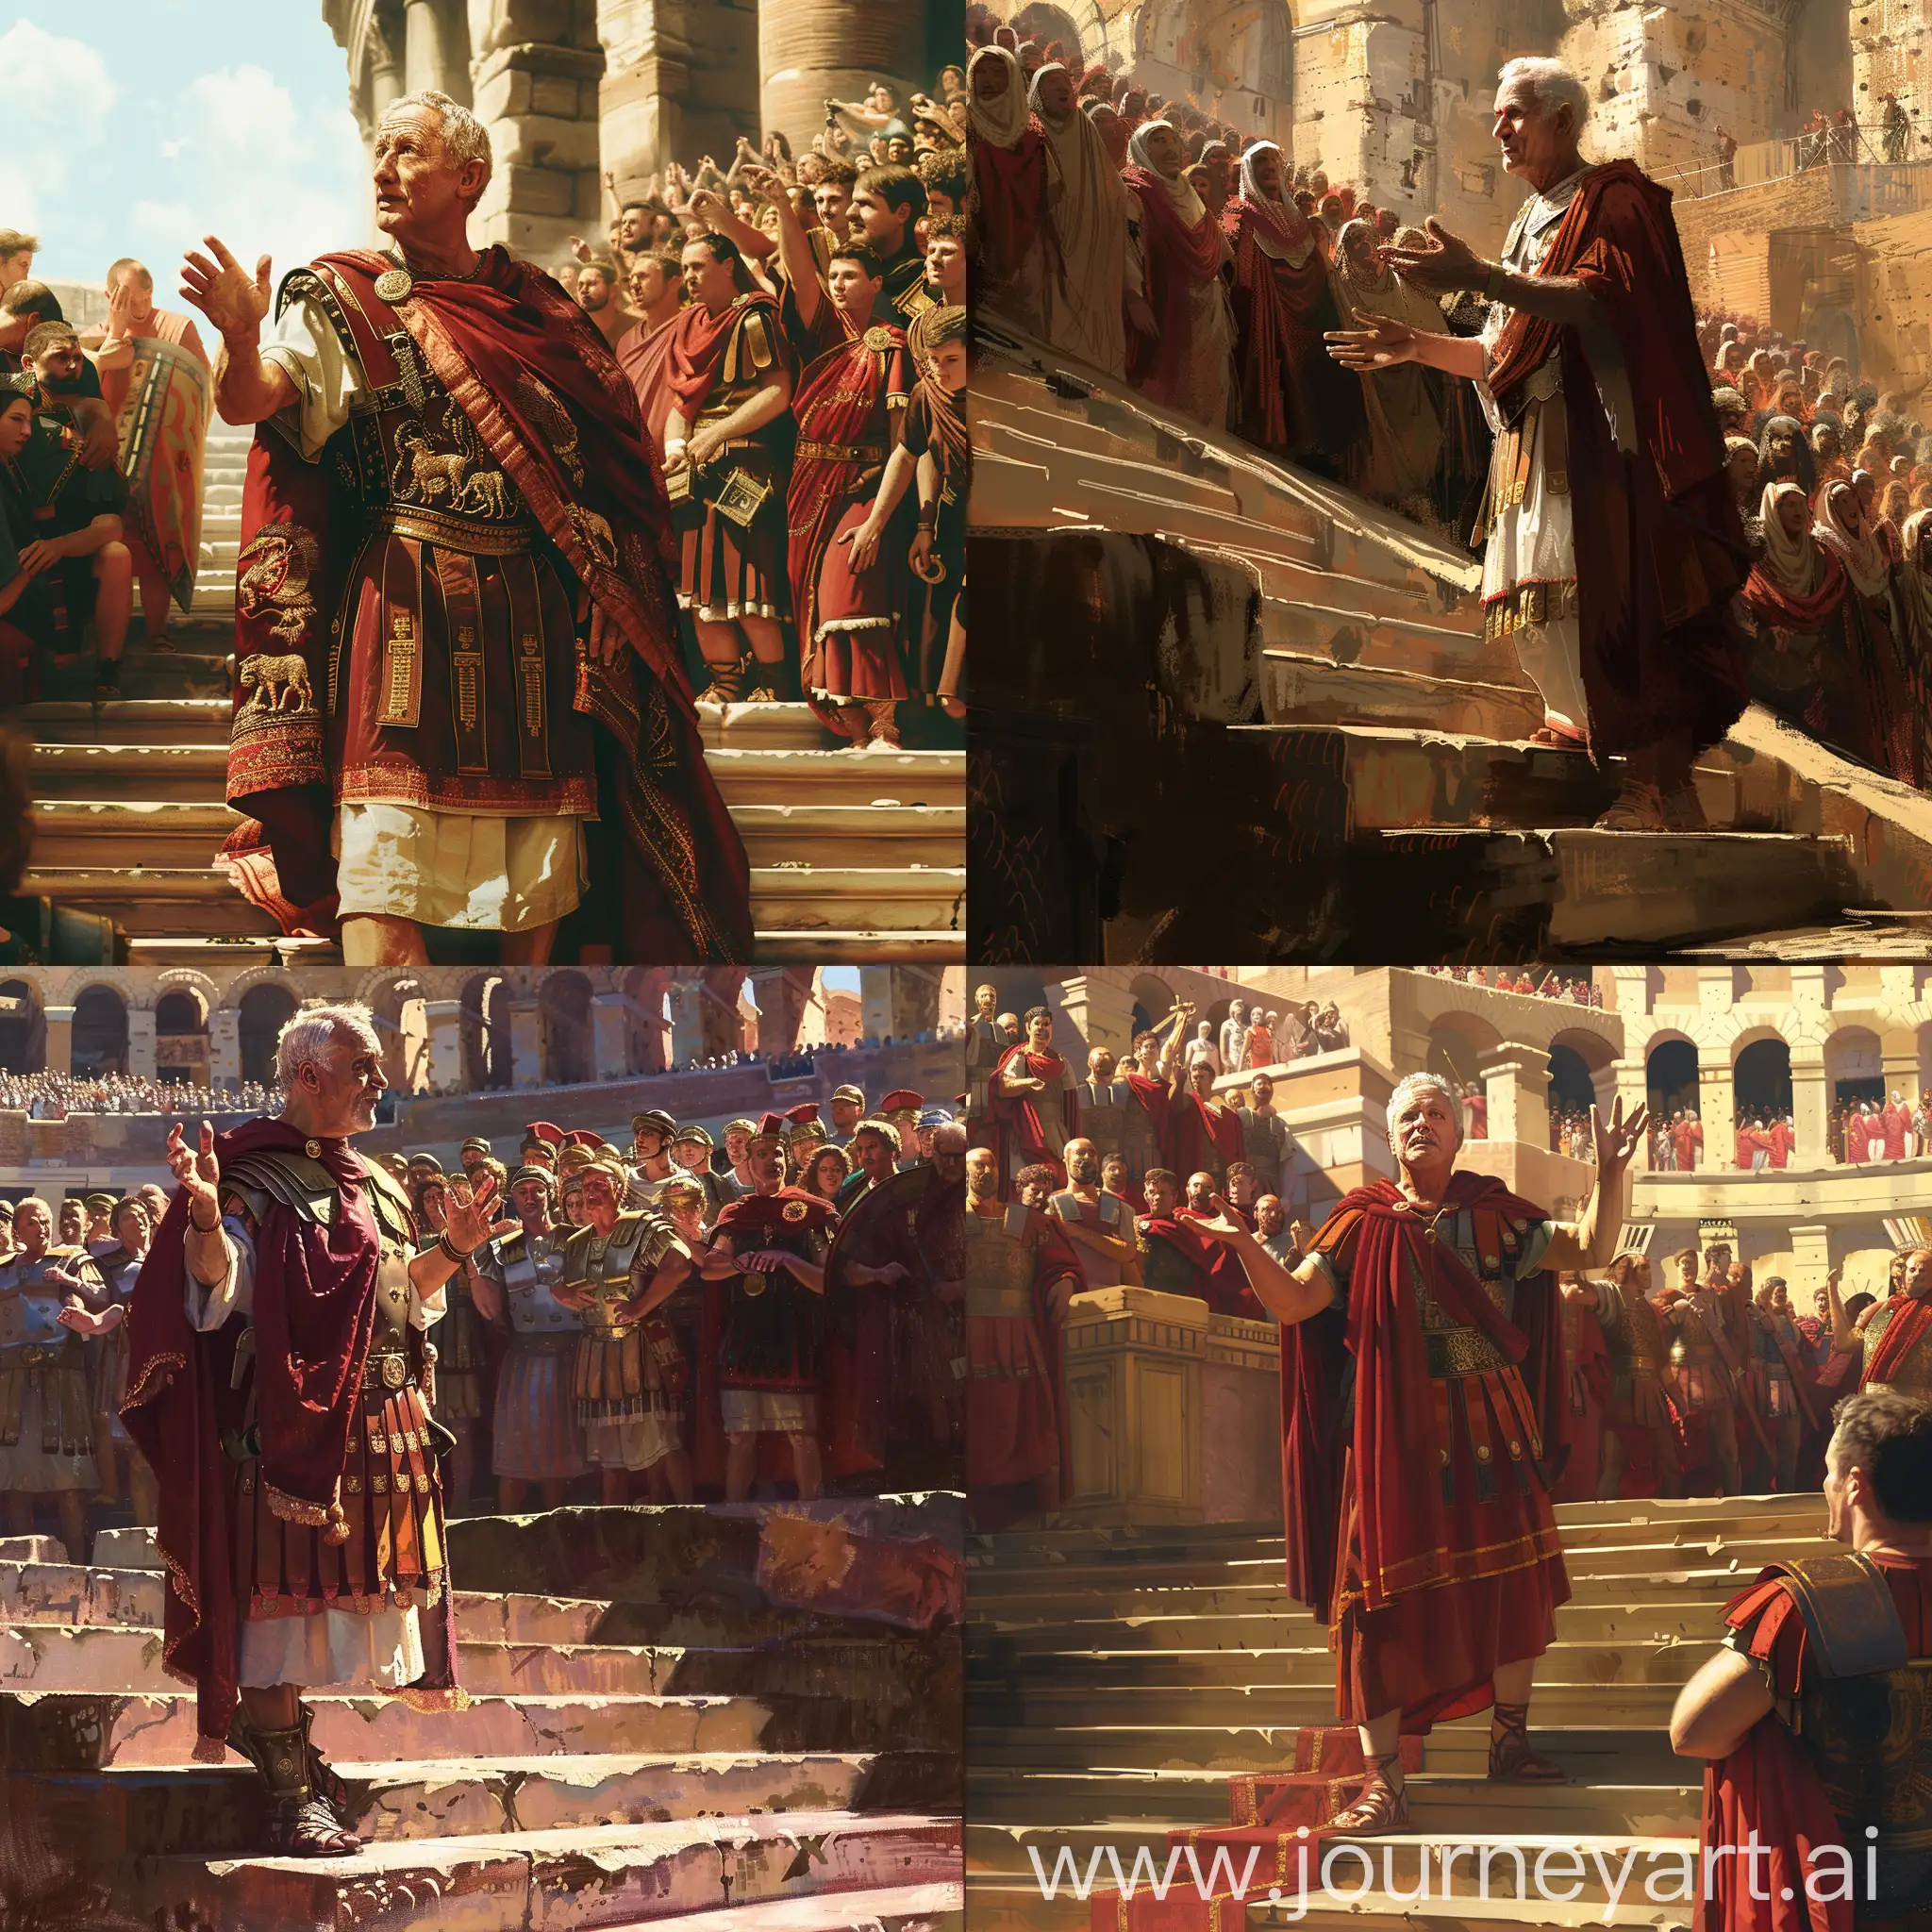 Majestic-Roman-Ruler-Inspires-Jubilation-at-the-Colosseum